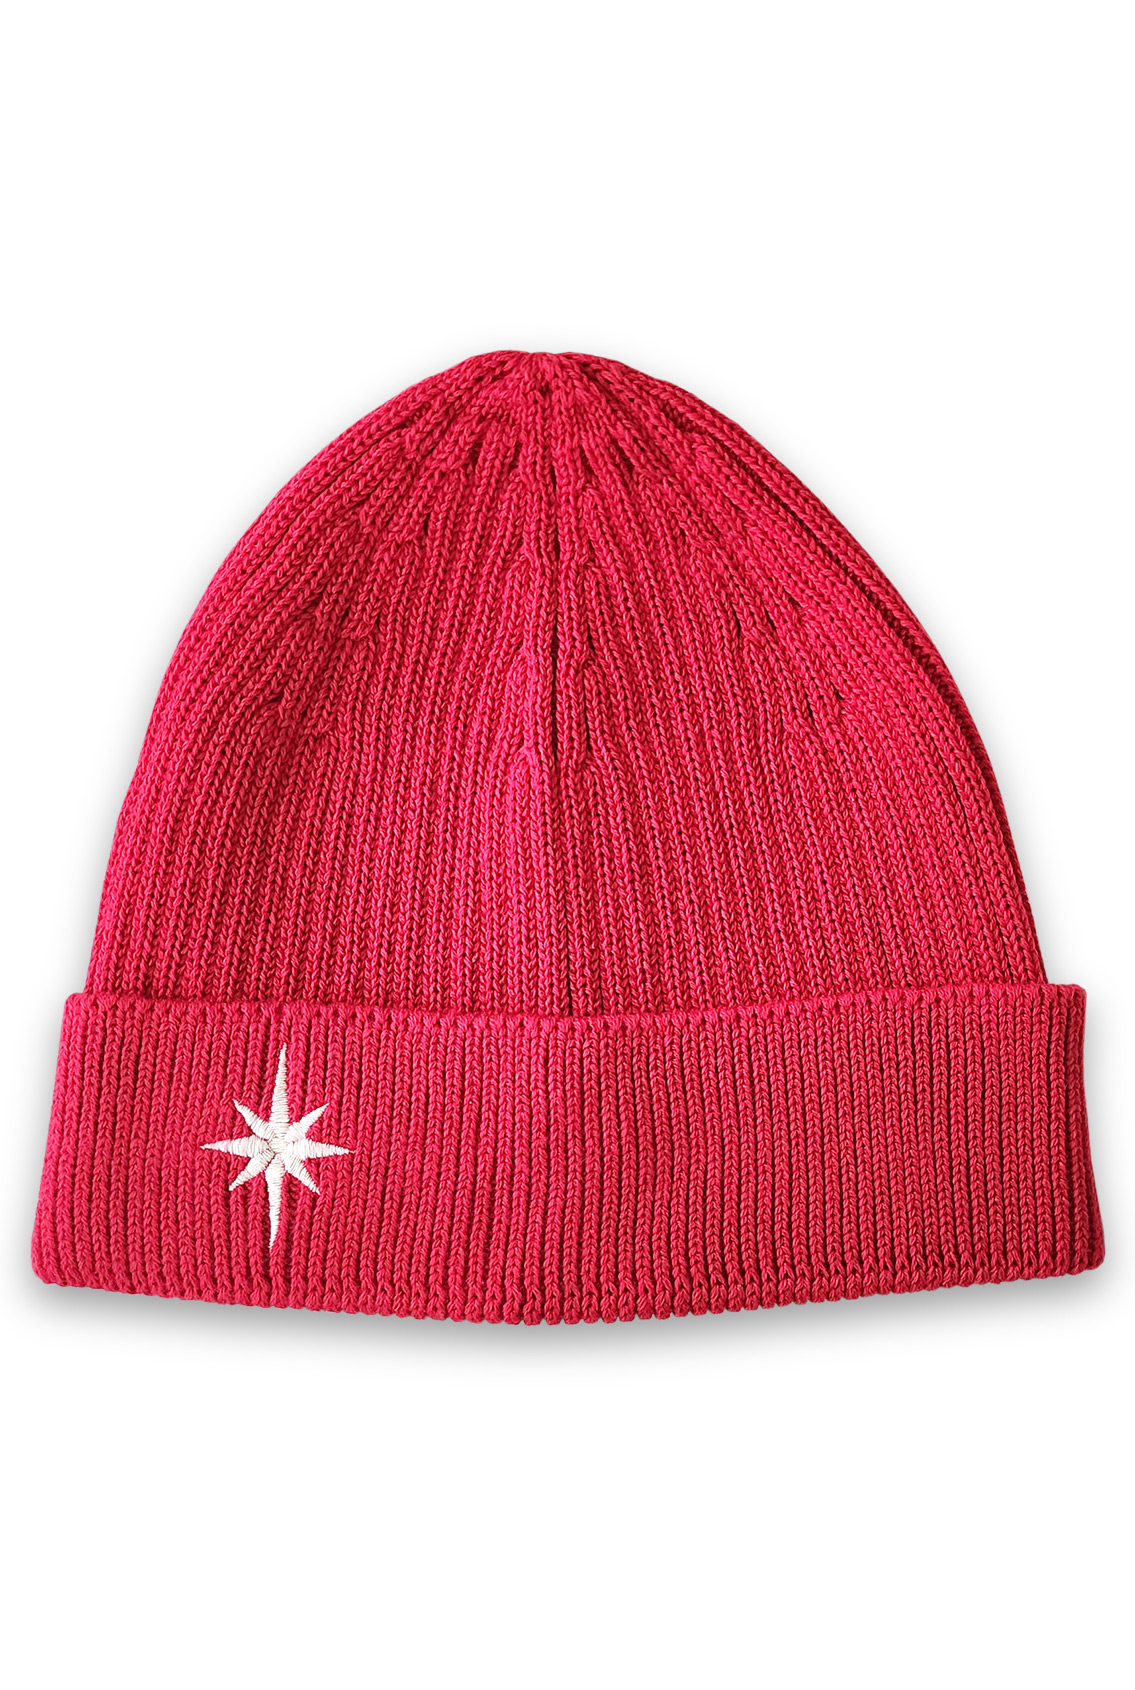 red embroidered beanie hat